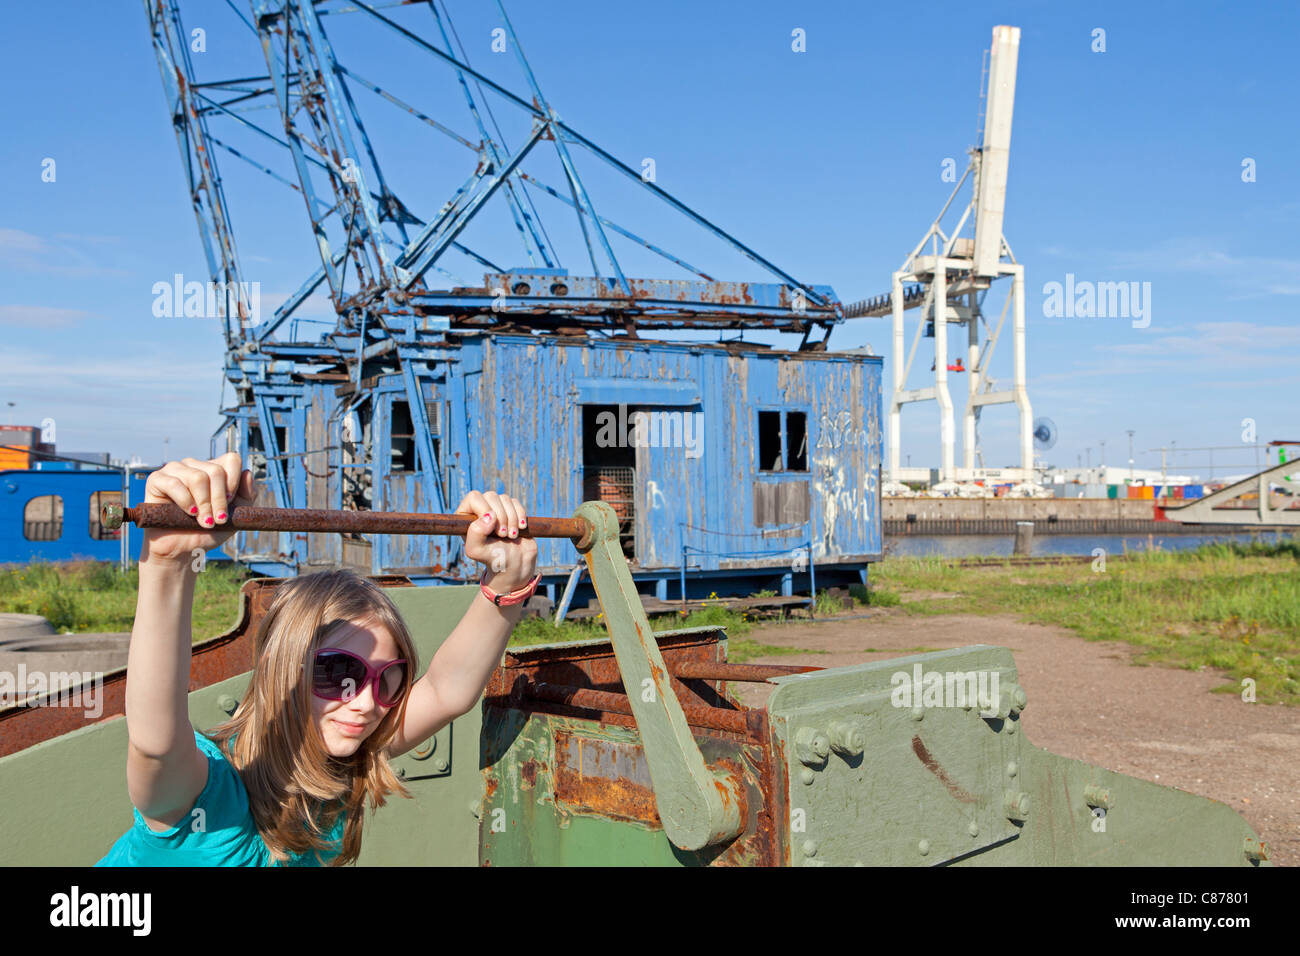 young girl trying to operate an old crank handle at the harbour museum, Hamburg Wilhelmsburg, Germany Stock Photo